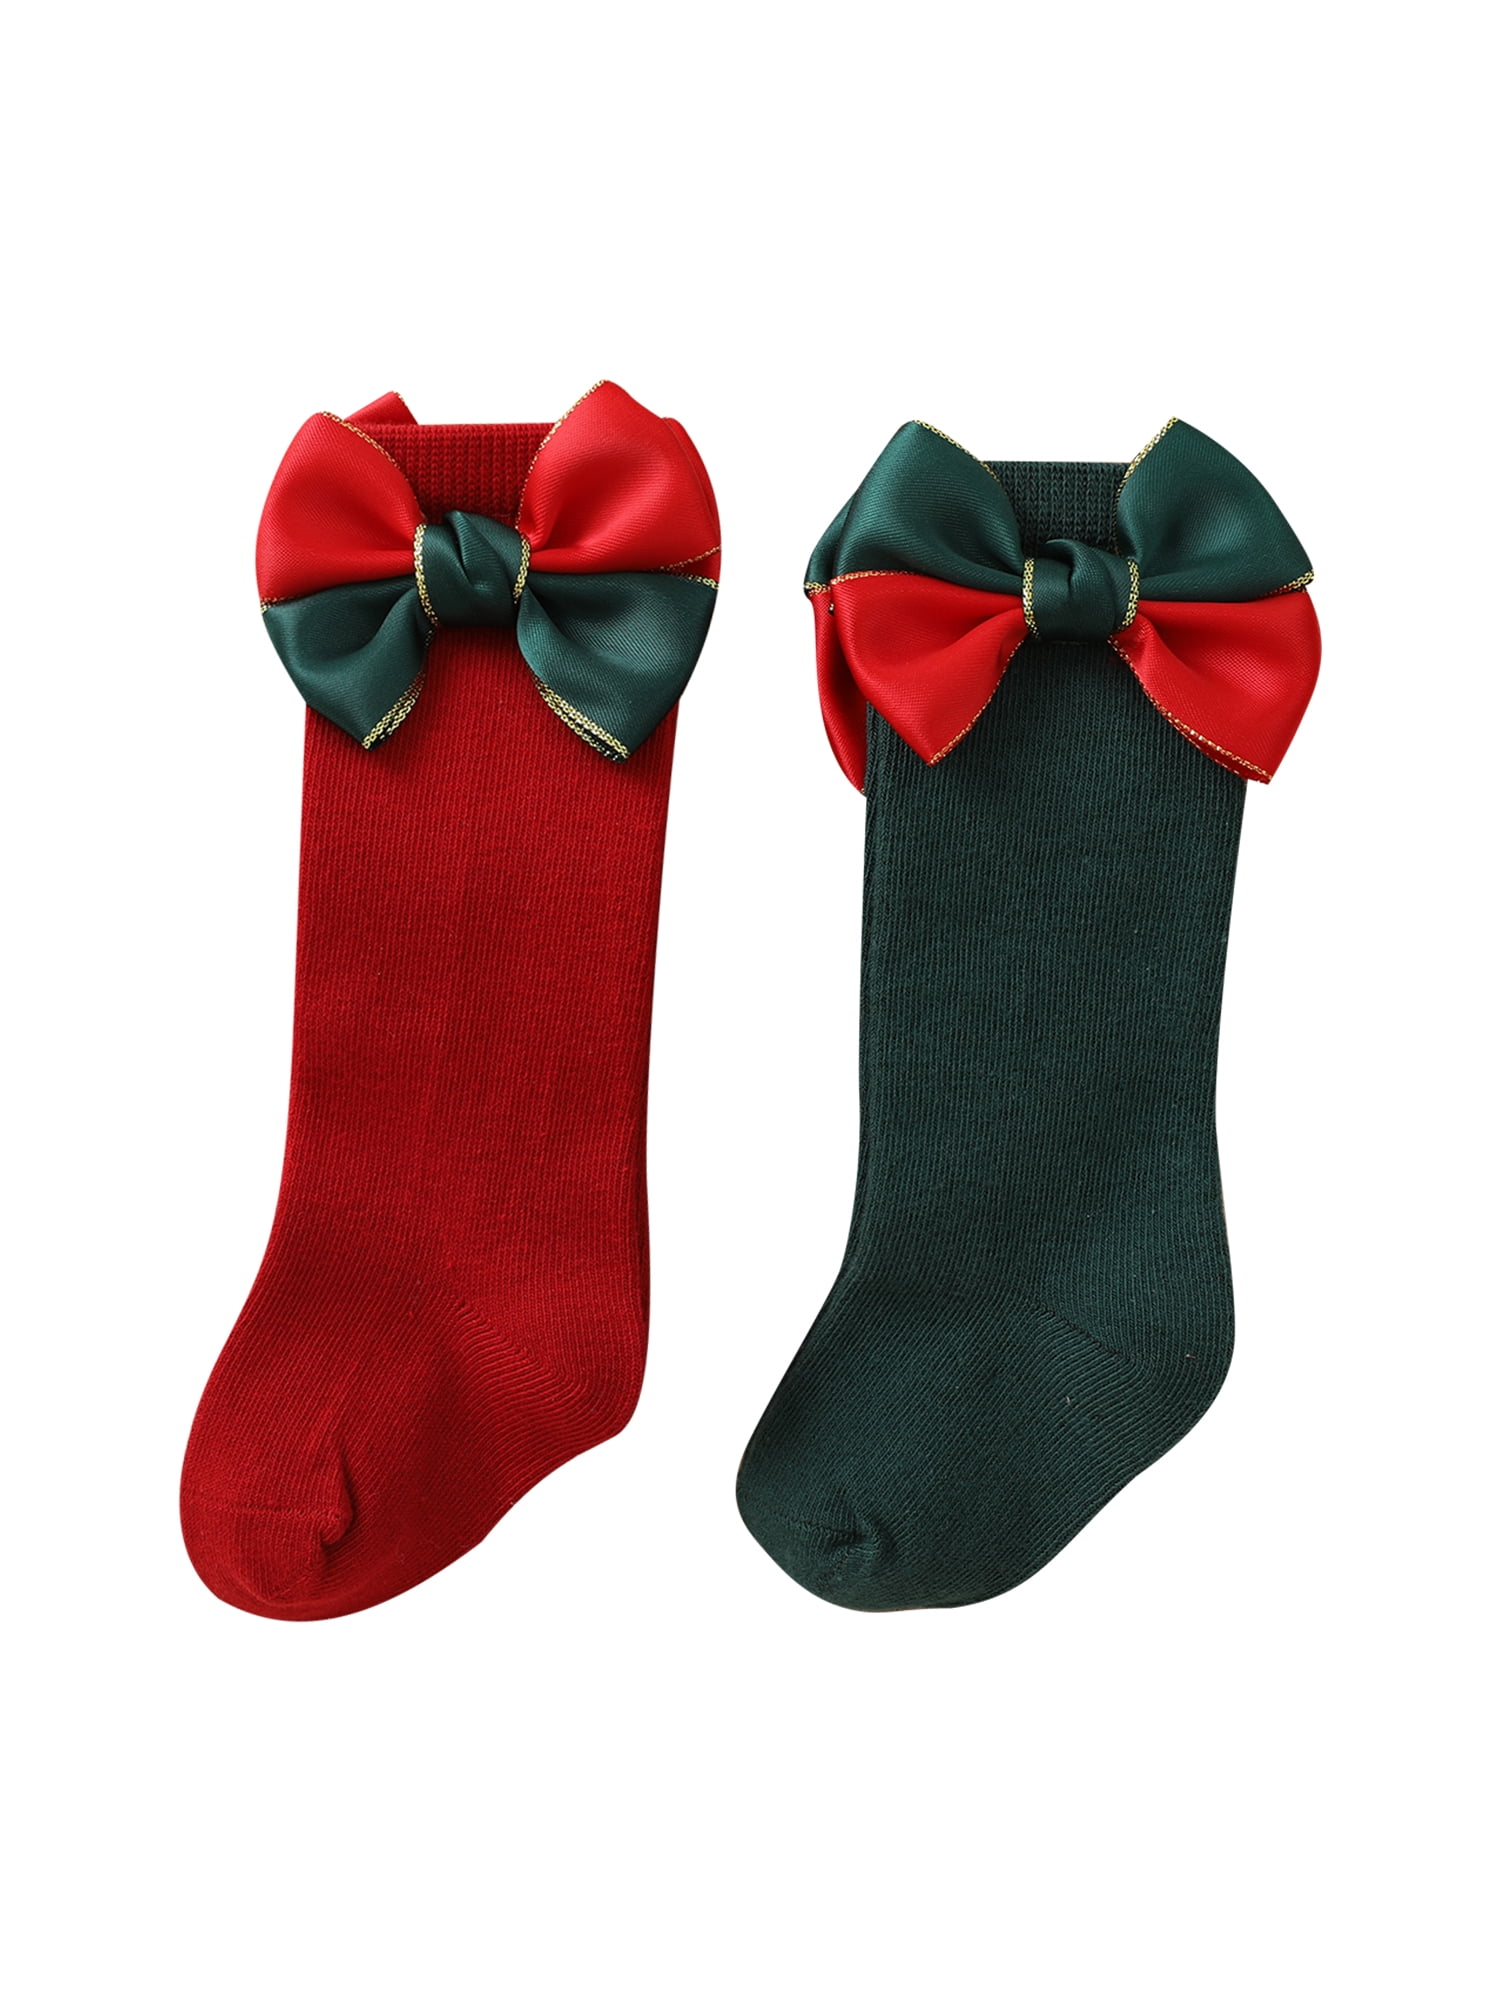 2 Pairs Girls Cable Knit Knee High Satin Bow Socks